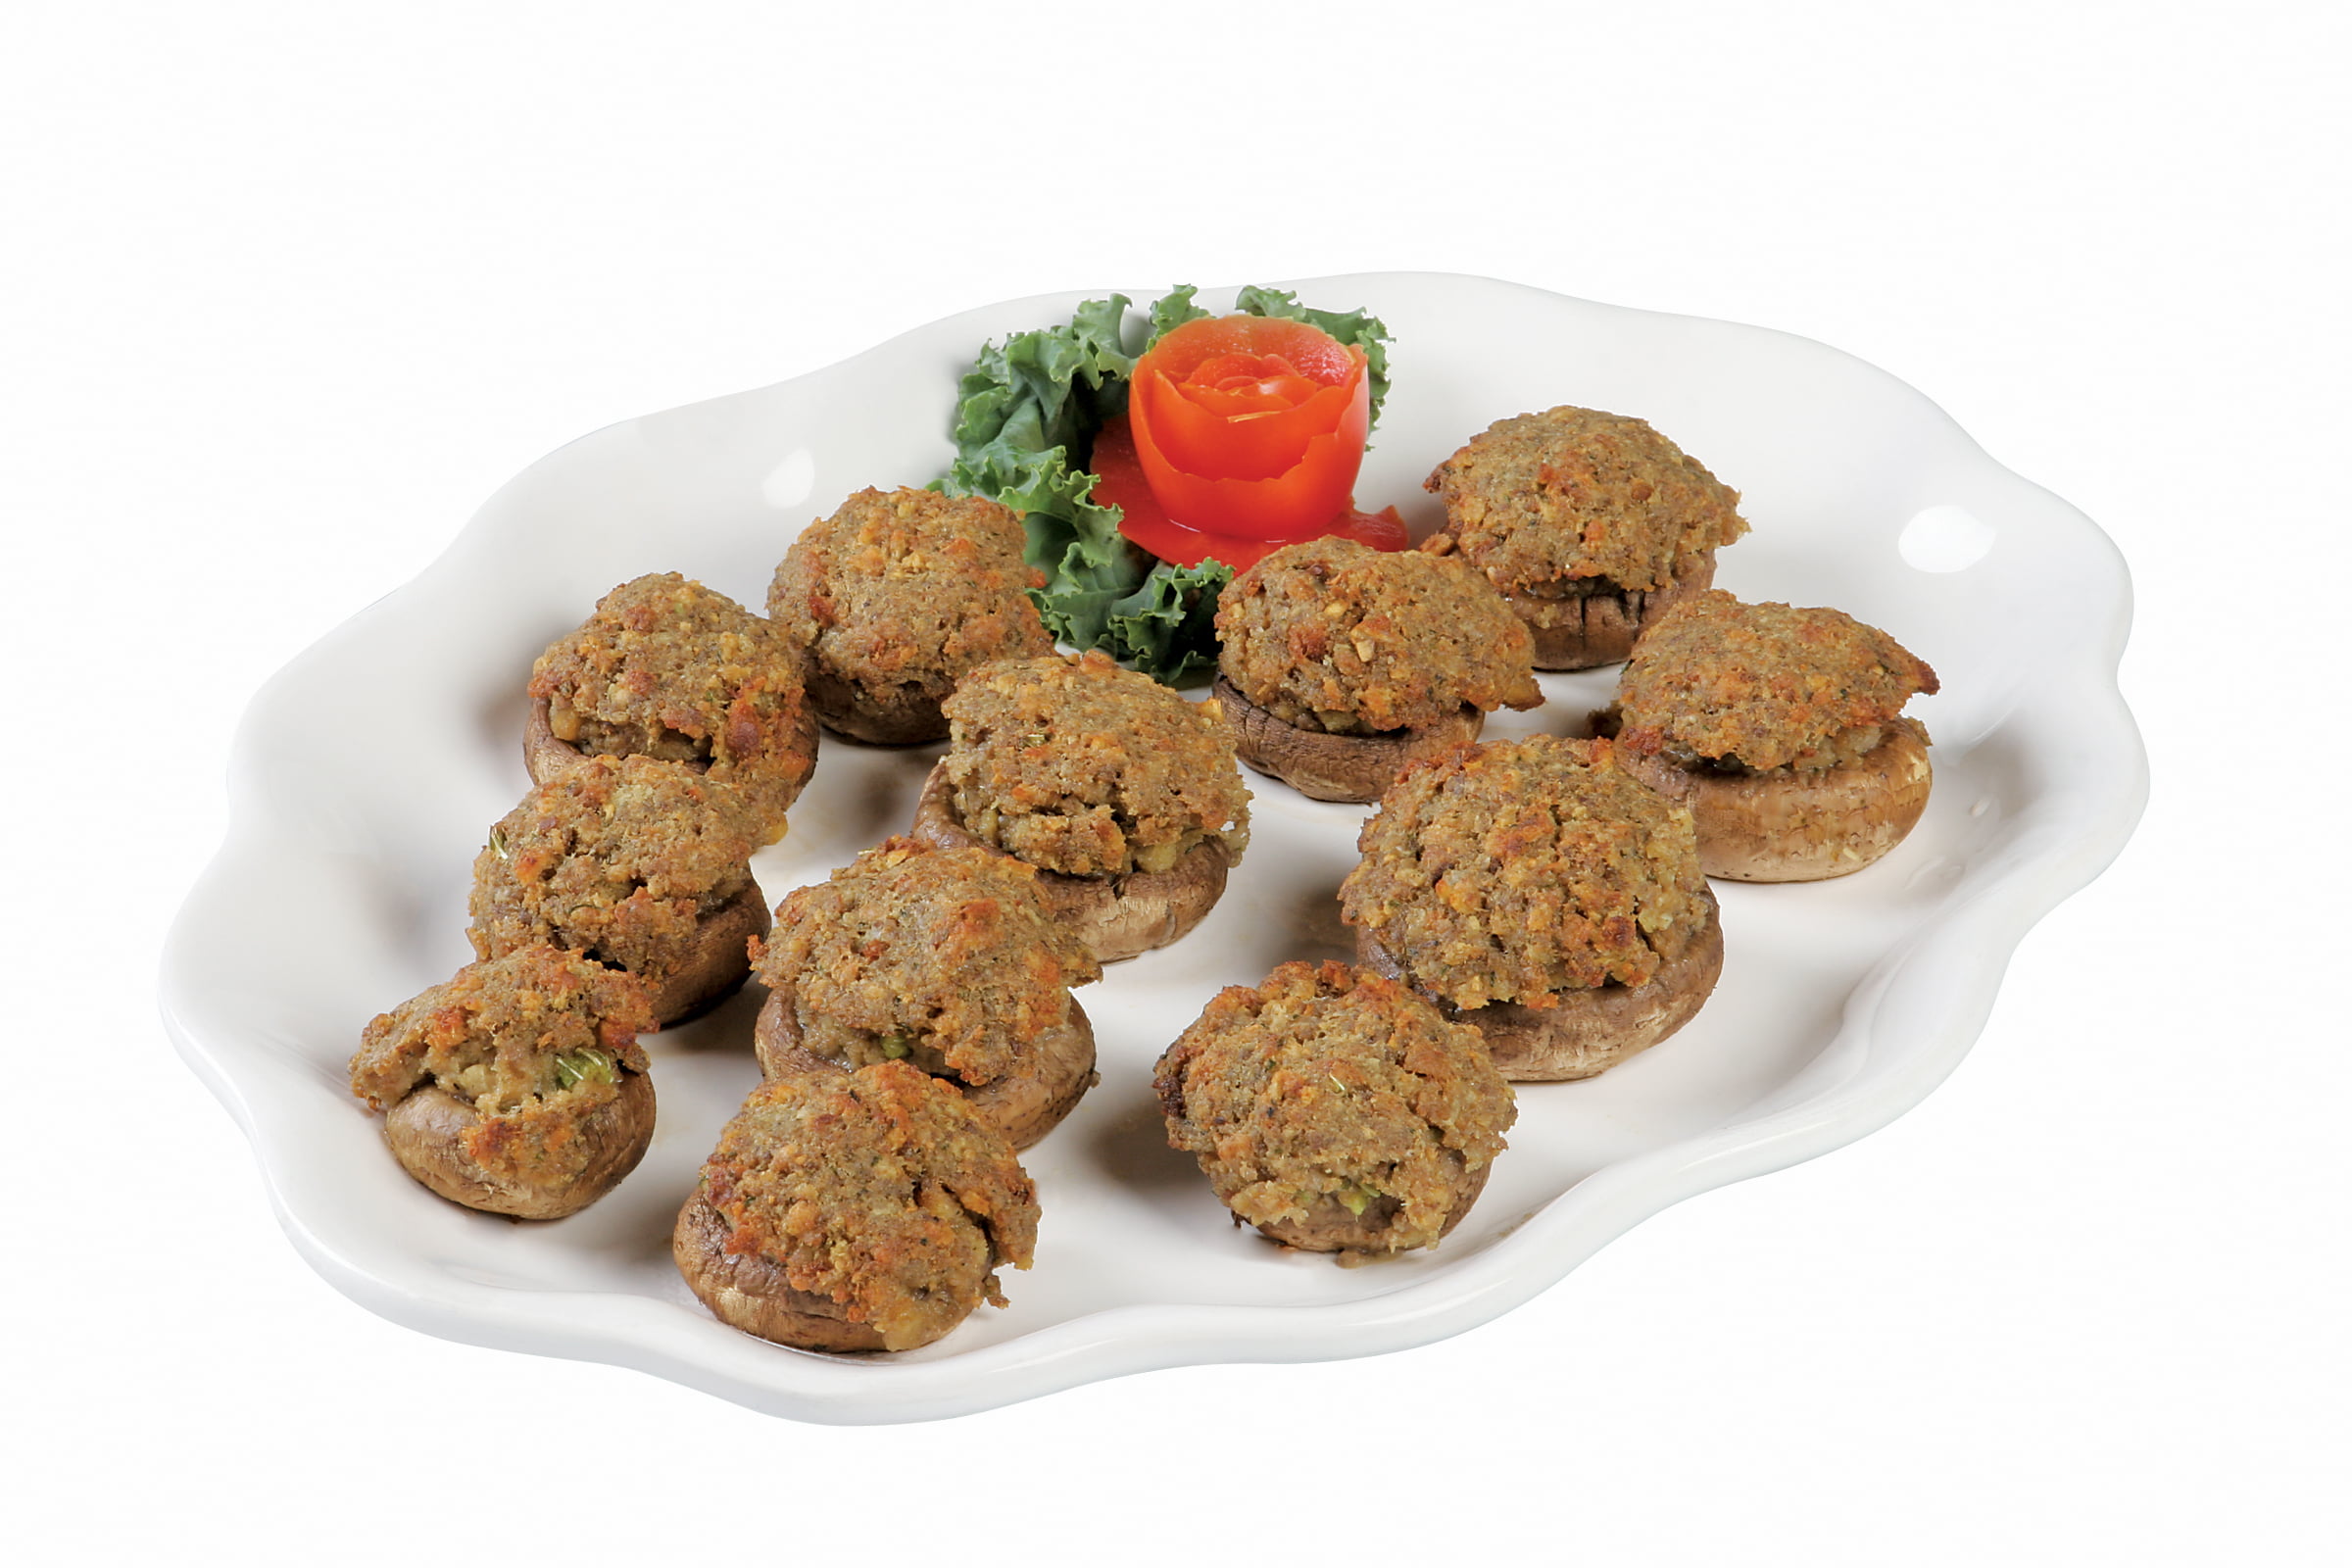 Stuffed mushrooms on white plate with garnish Food Picture